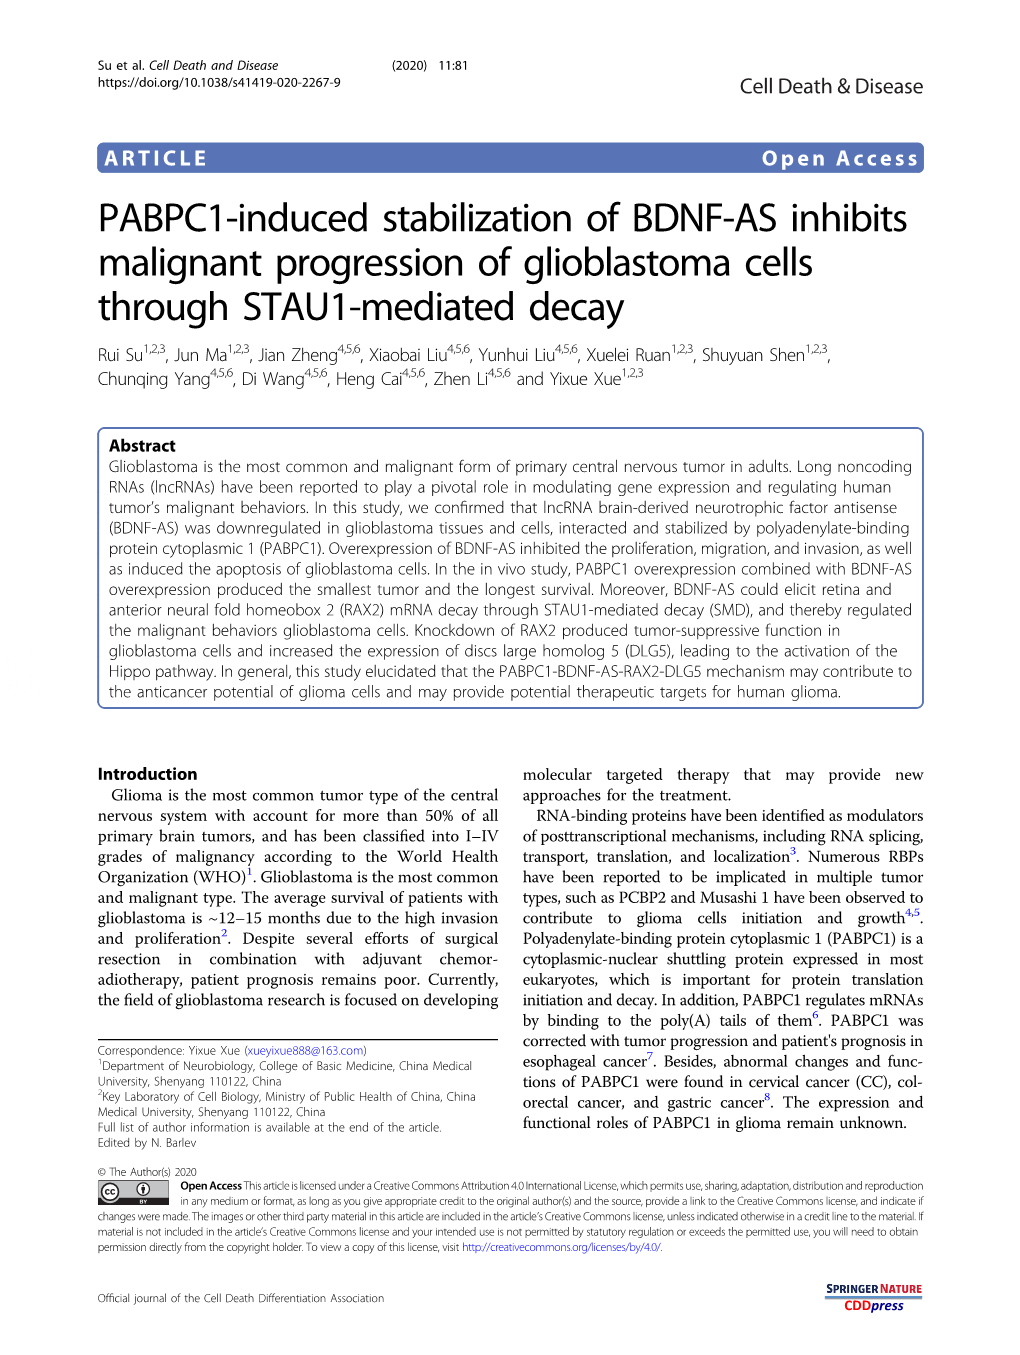 PABPC1-Induced Stabilization of BDNF-AS Inhibits Malignant